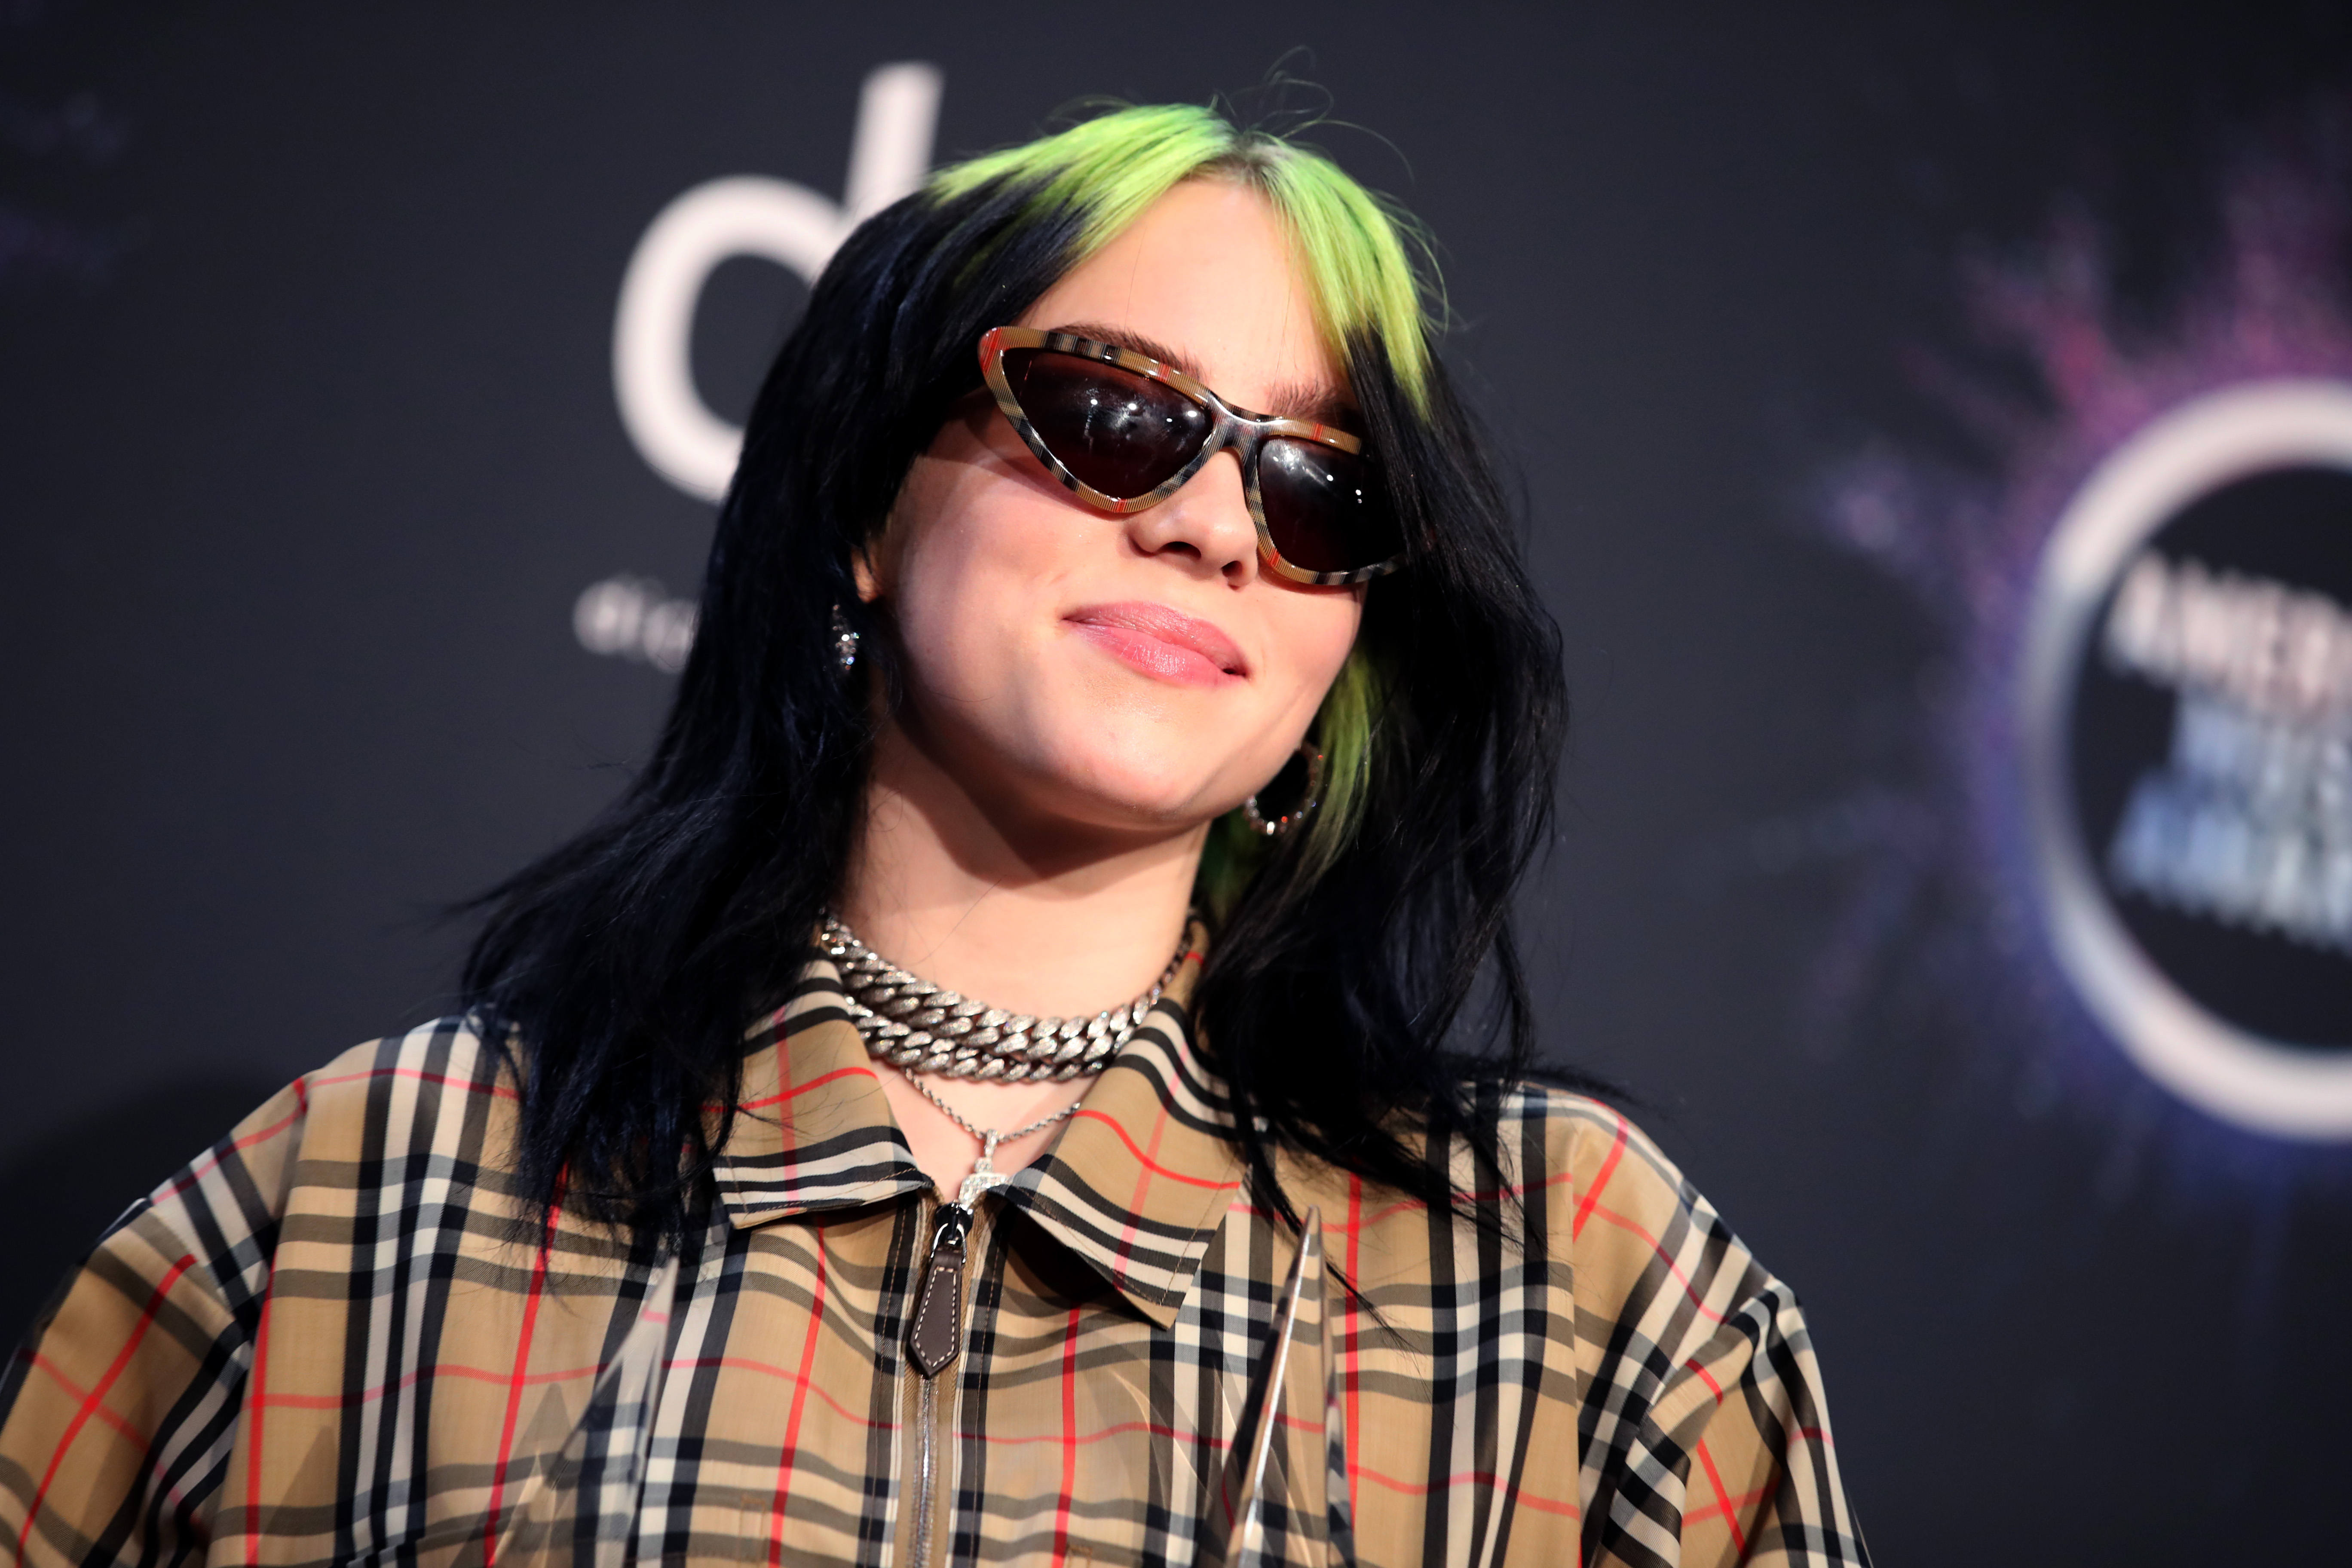 Apple selling limited-edition Billie Eilish Gift Card following TV+  documentary release - 9to5Mac